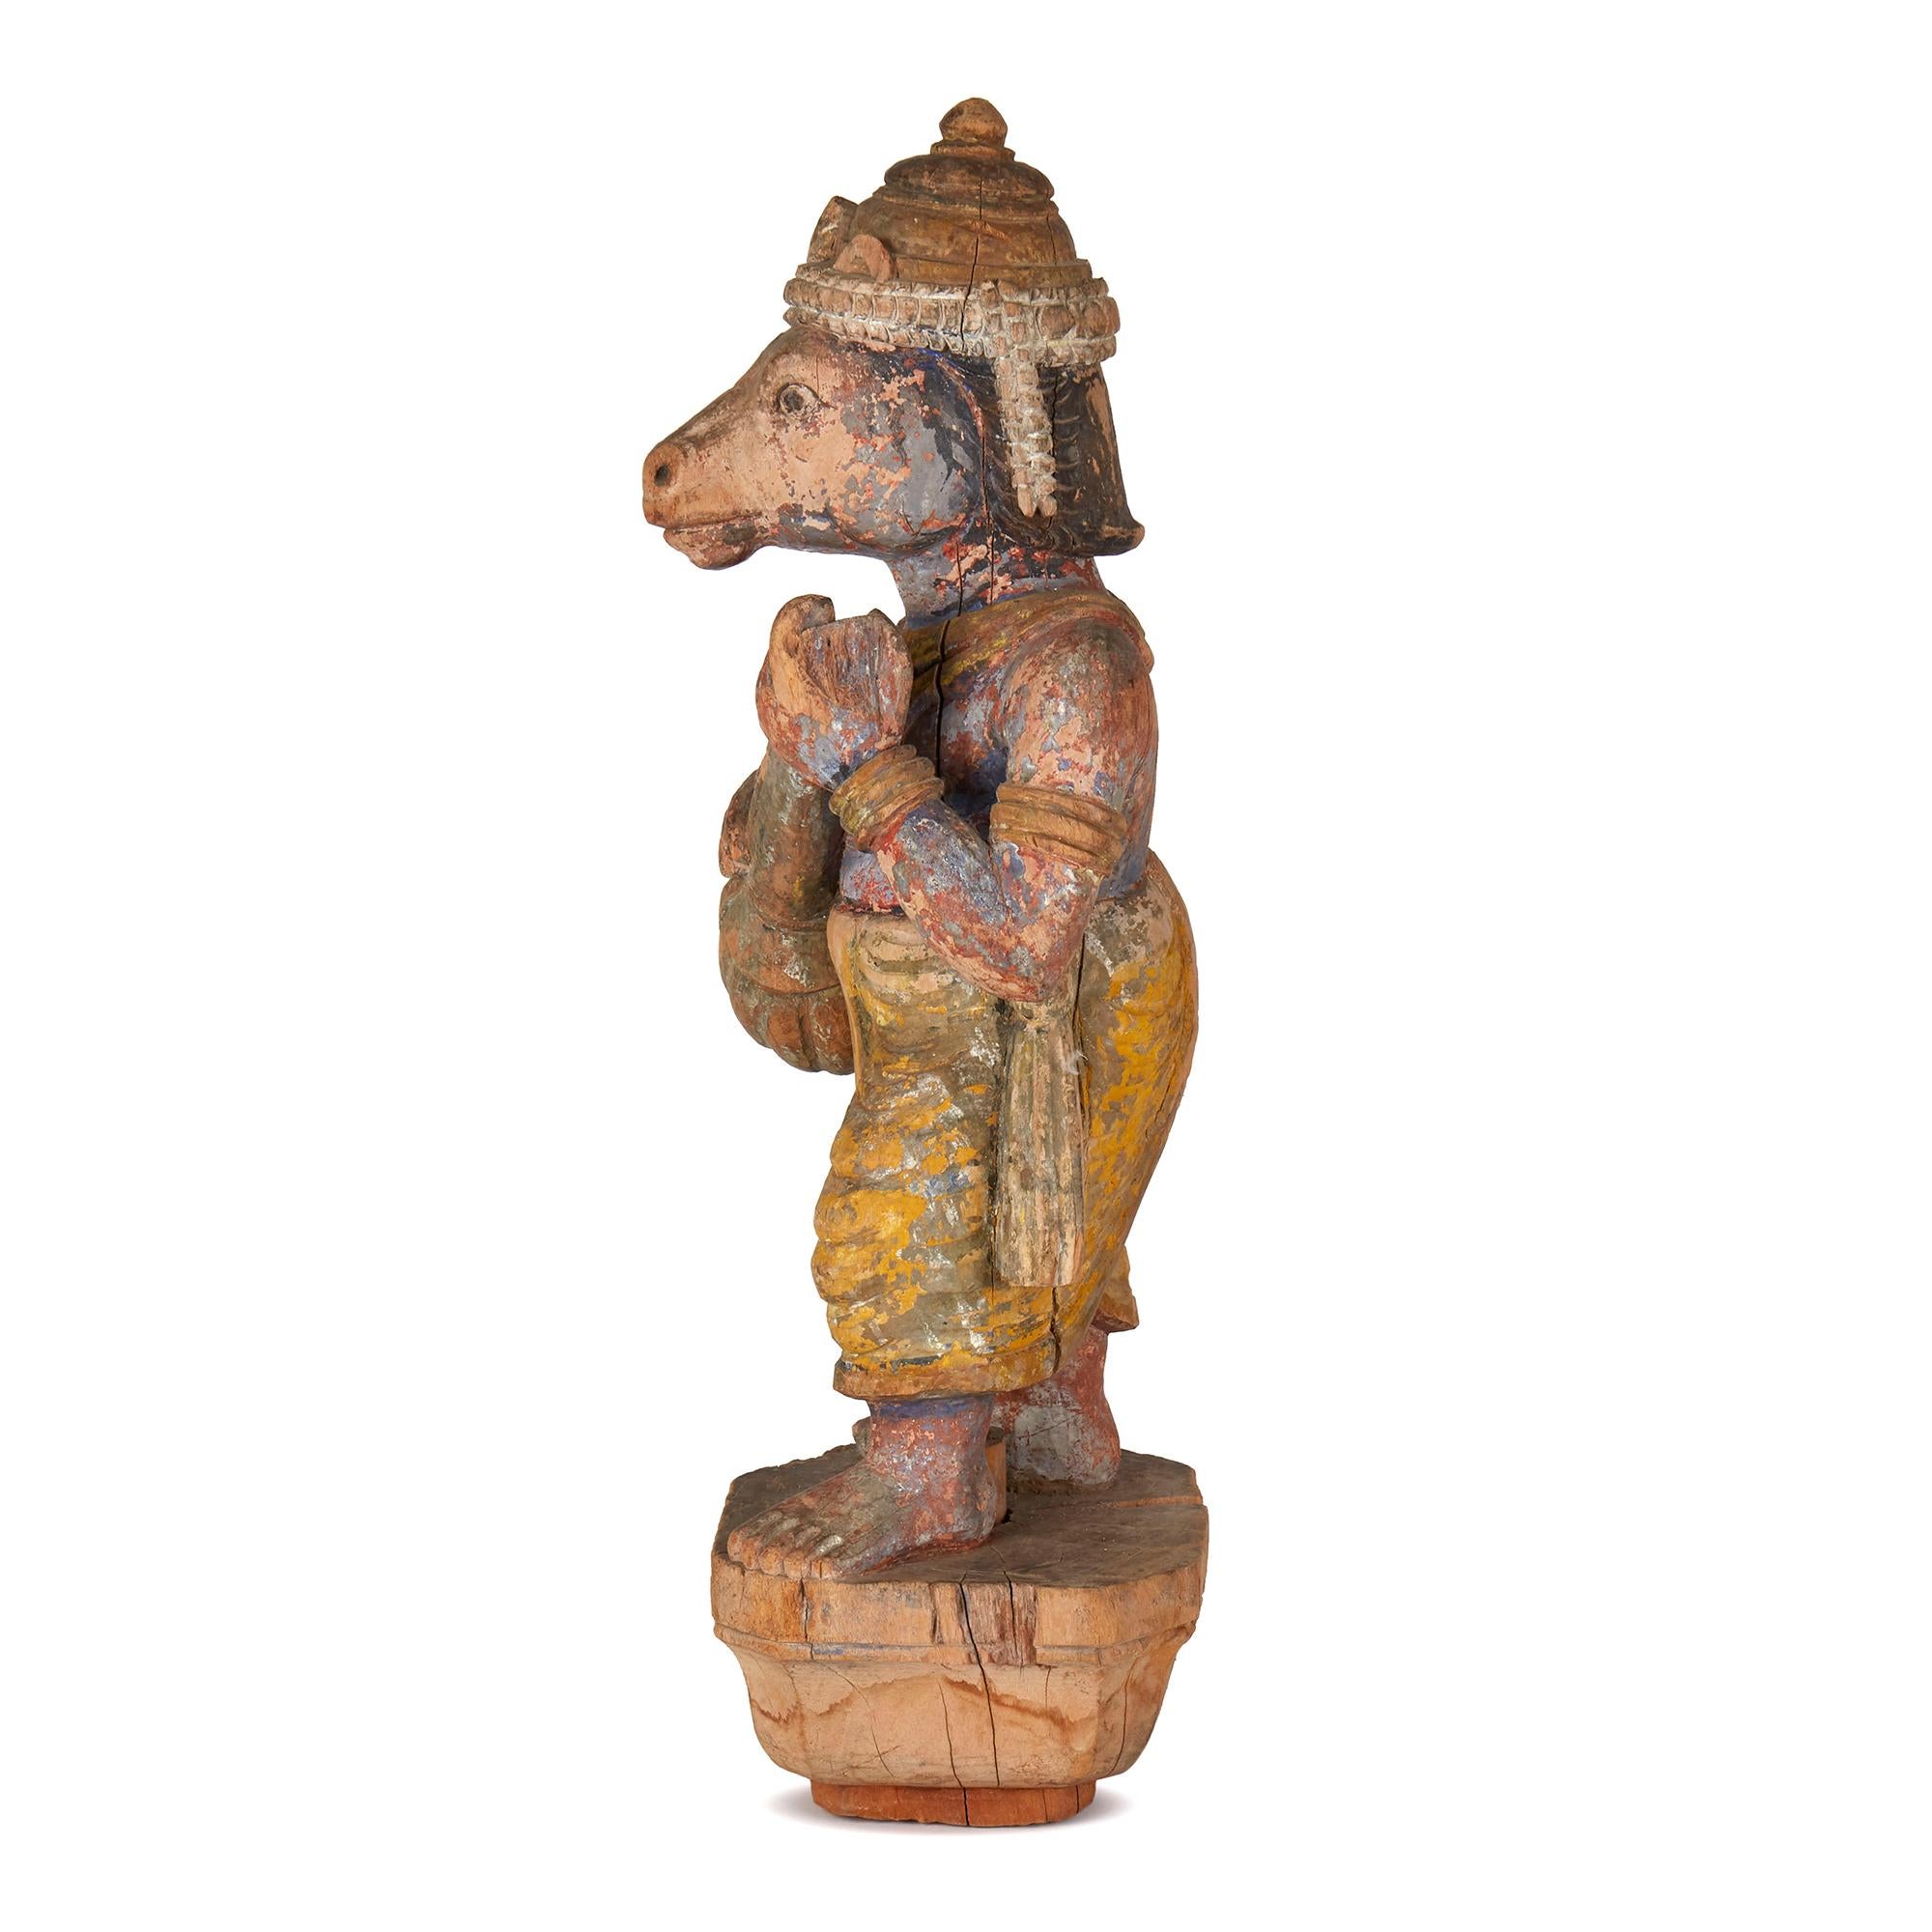 A Fine hand carved antique/vintage Indian wooden figure of an Indian deity with a horse's head and playing a lute like instrument. The figure believed to be a processional mount has original remnants of paint and is mounted on a chip carved wooden